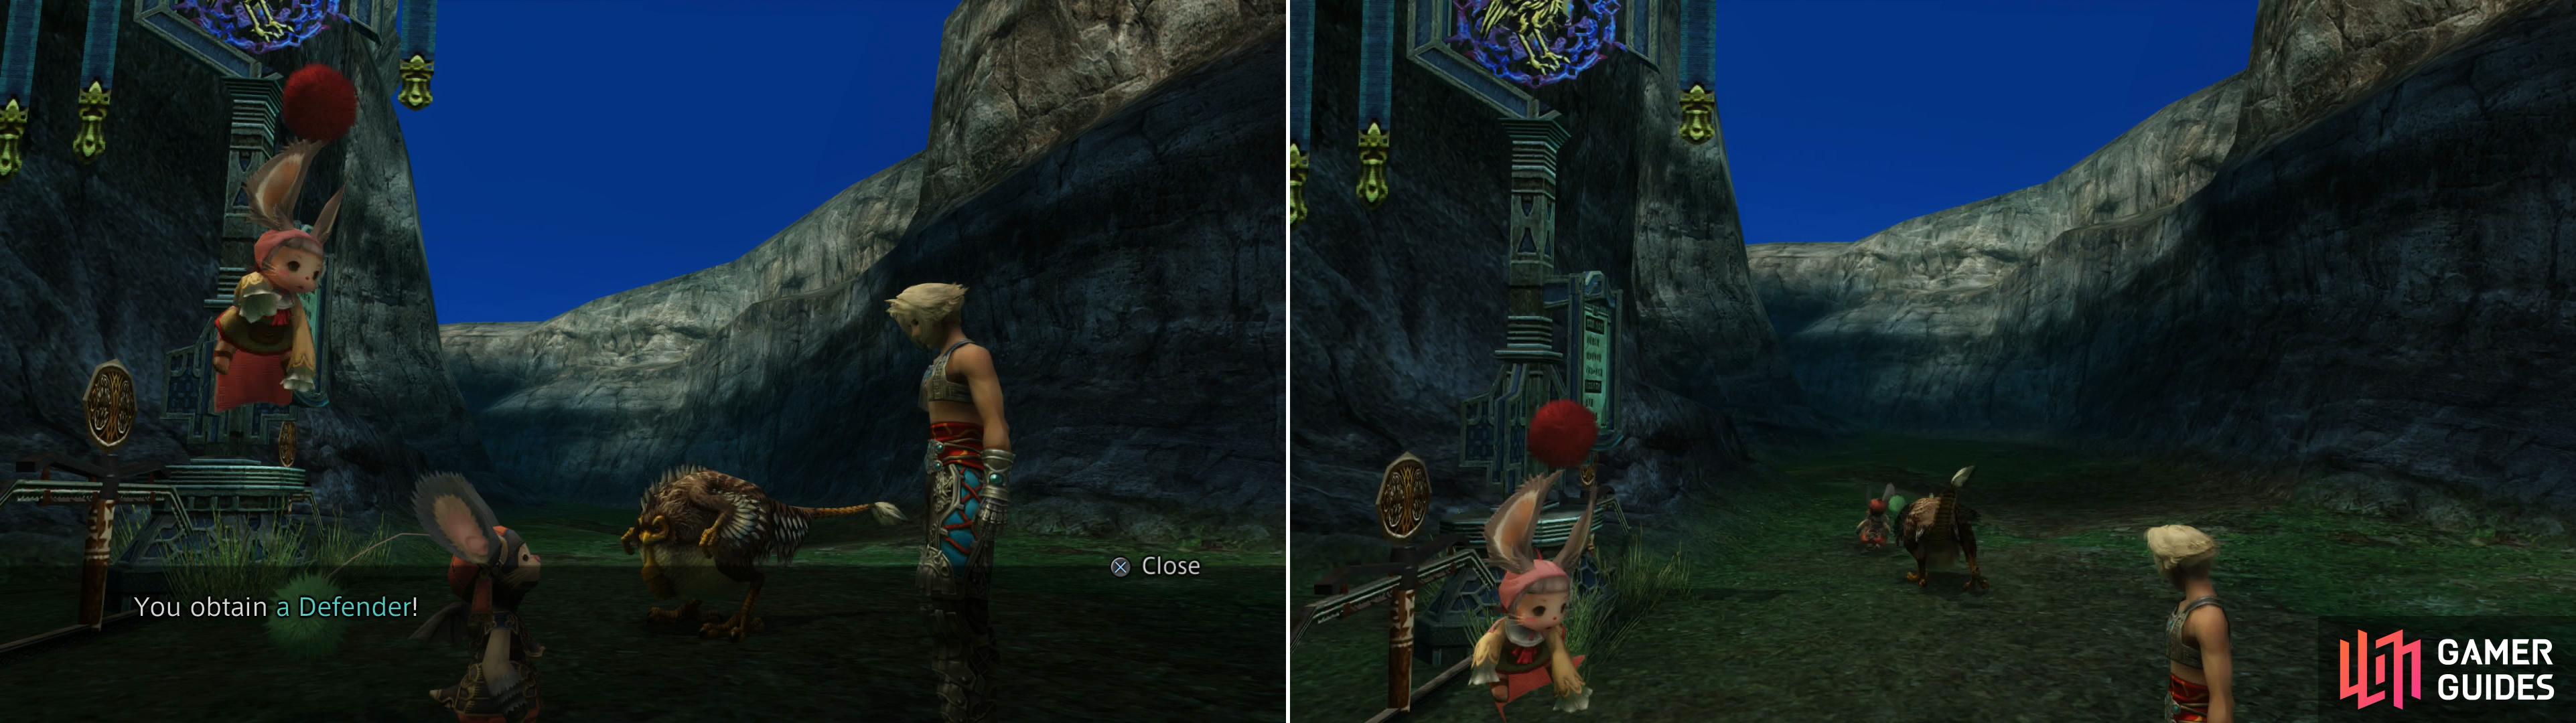 For helping the Moogle rent a Chocobo worthy of his funds you’ll be rewarded with a Defender (left) after which the “Chocobo” will find that the gig isn’t all it’s cracked up to be (right).